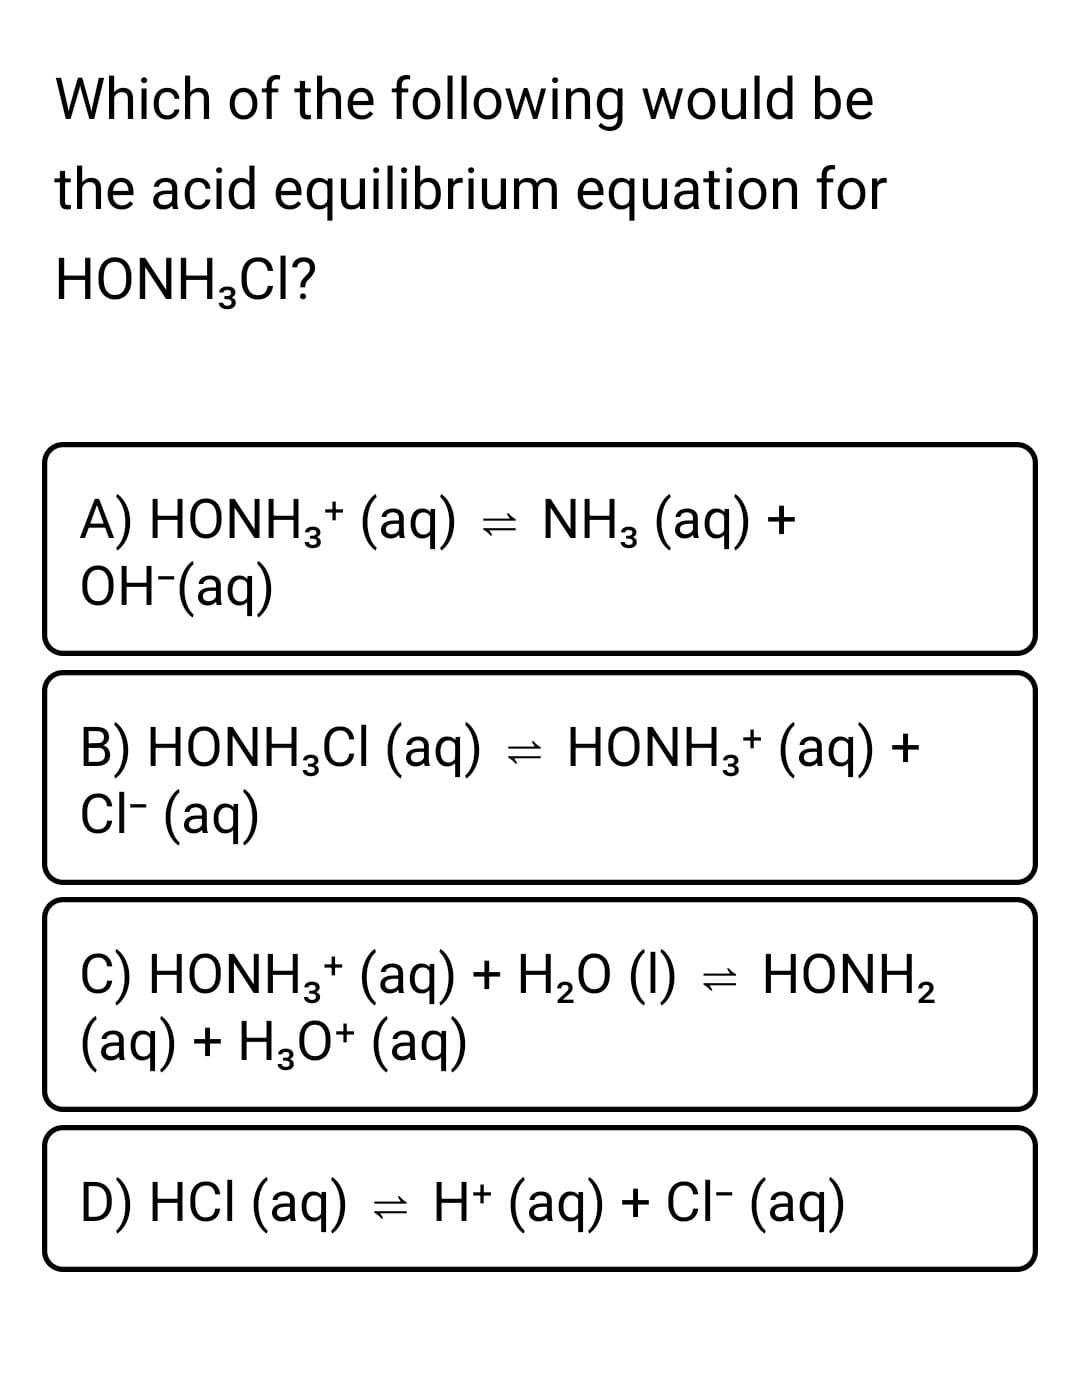 Which of the following would be
the acid equilibrium equation for
HONH;CI?
A) HONH;* (aq) = NH, (aq) +
он (аq)
B) HONH,CI (aq) = HONH;* (aq) +
Cl- (aq)
C) HONH;* (aq) + H20 (1) = HONH2
(aq) + H30* (aq)
D) HCI (aq) = H+ (aq) + Cl- (aq)
